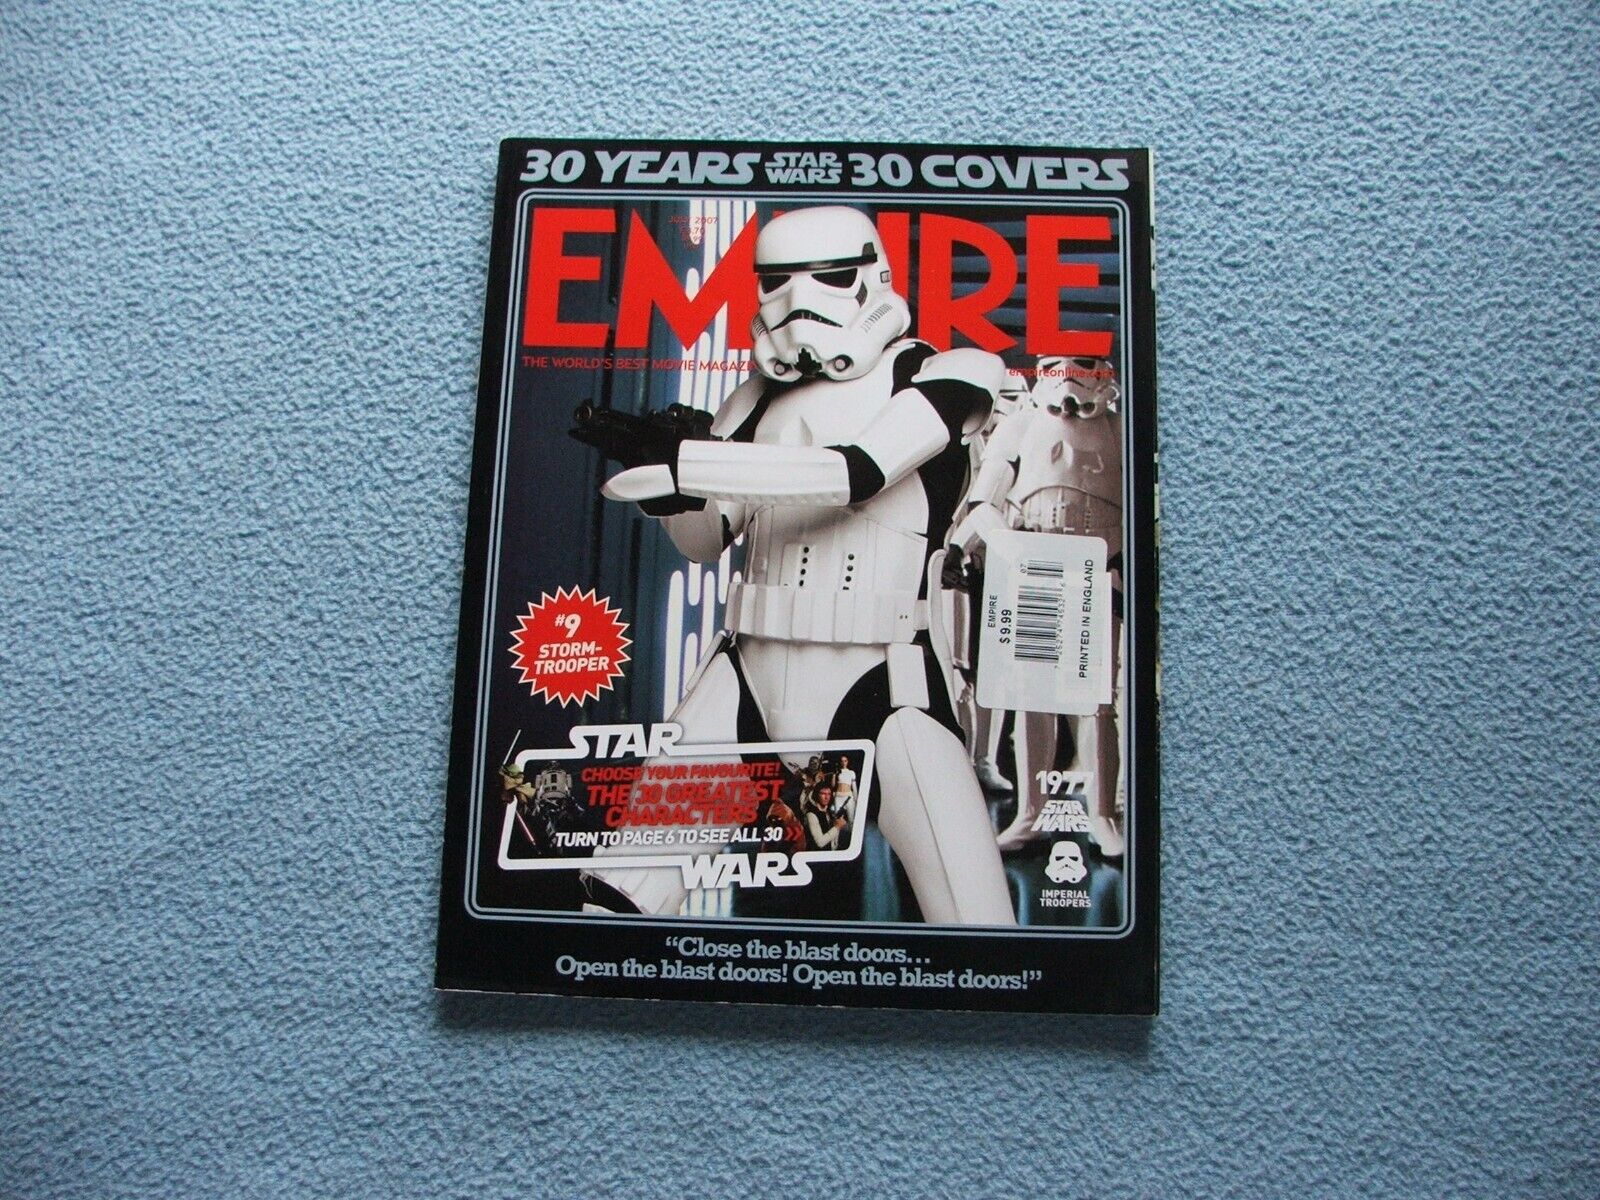 Empire Magazine July 2007 Star Wars 30 Years 30 Covers.  Stormtrooper